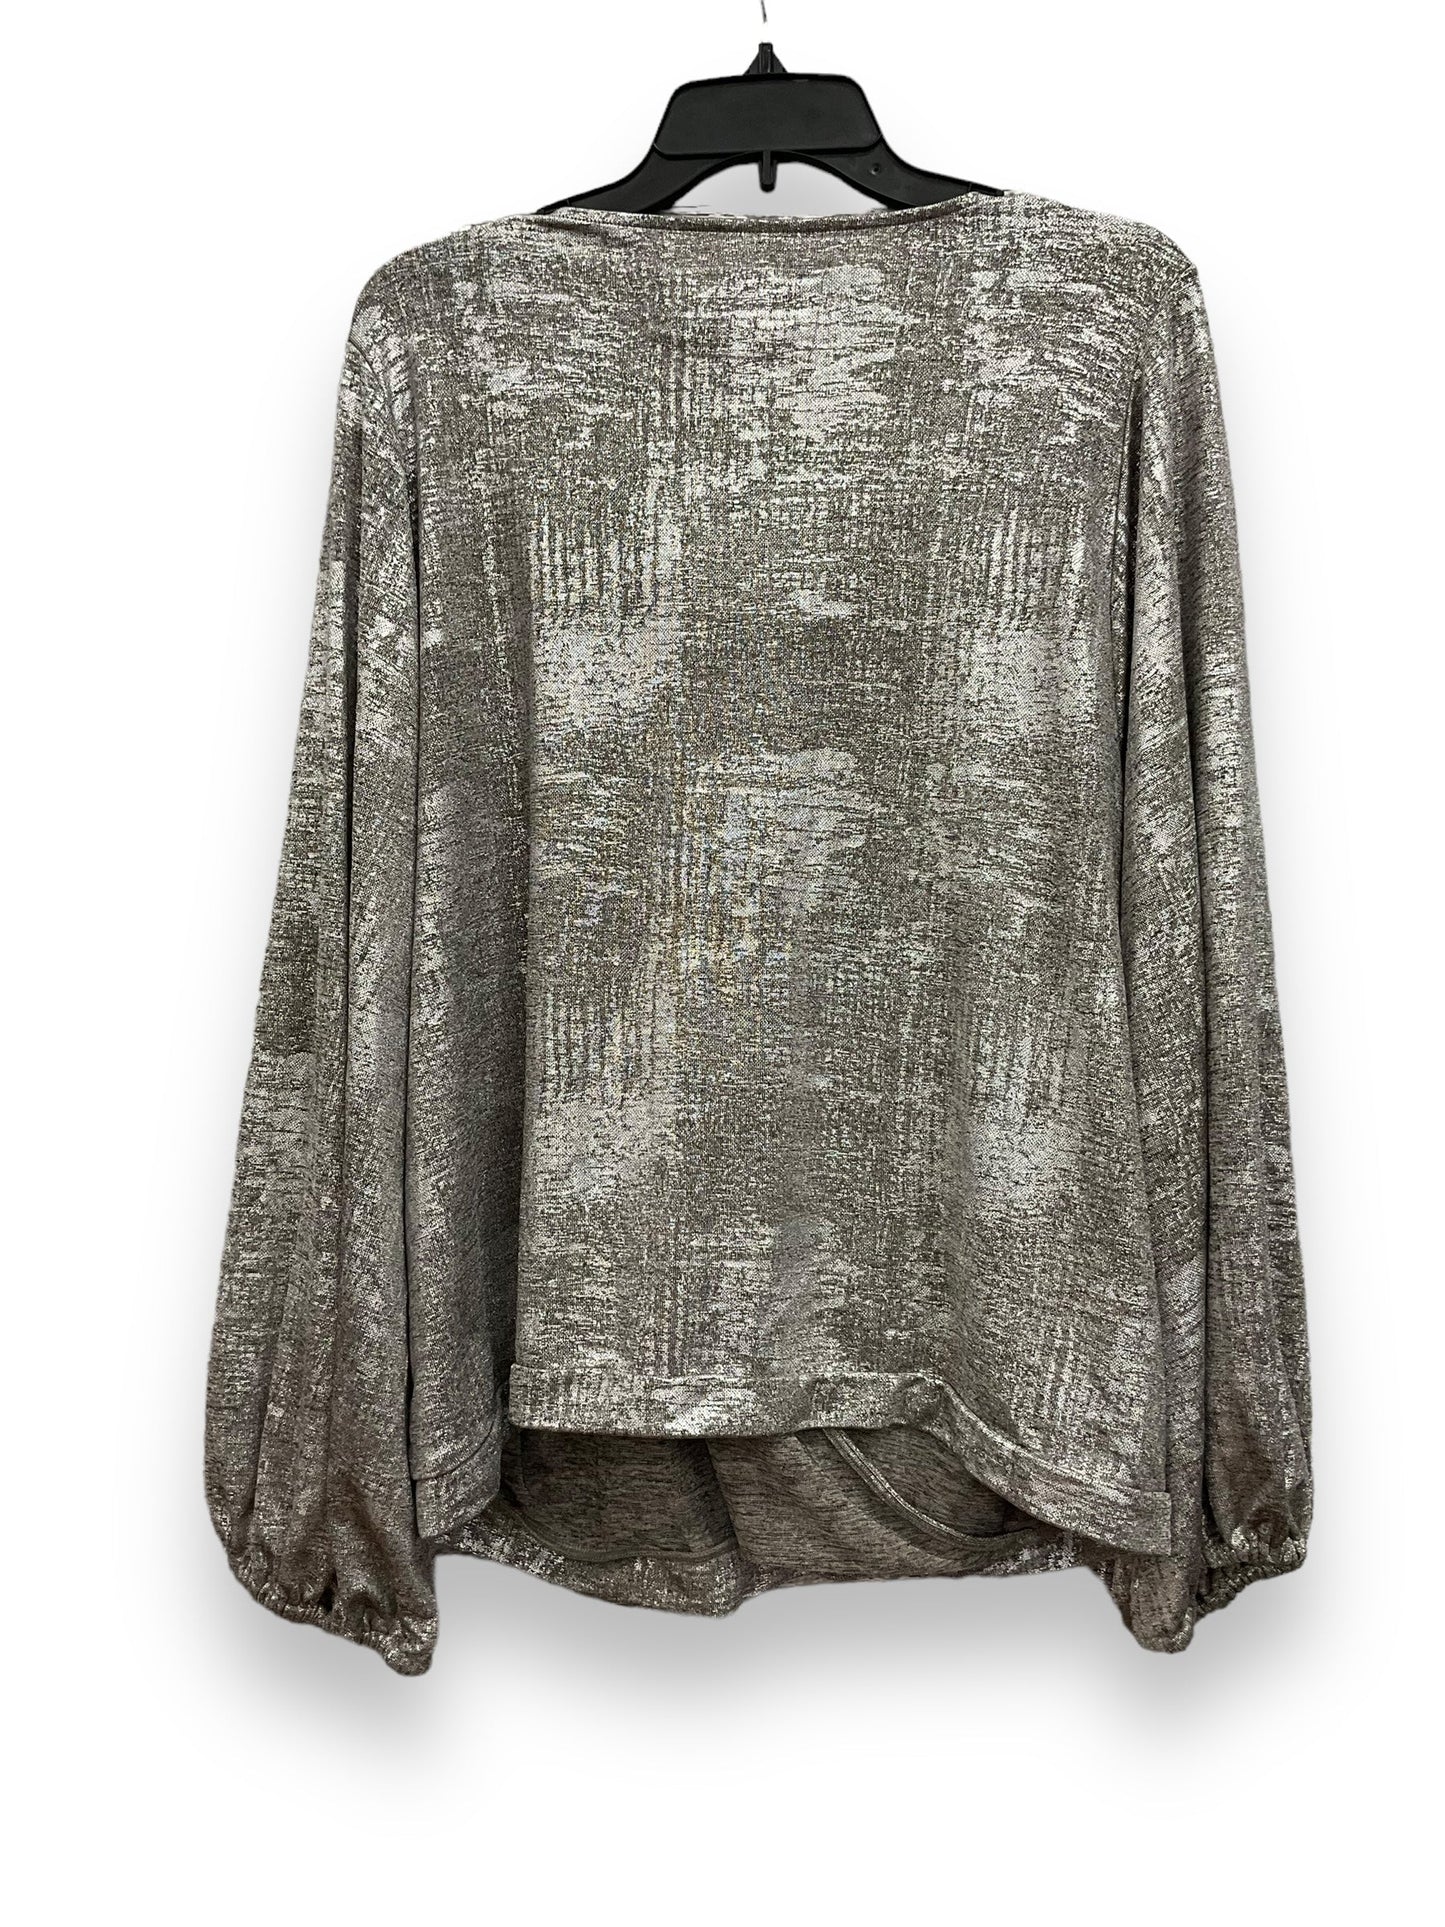 Silver Top 3/4 Sleeve Anthropologie, Size 2x